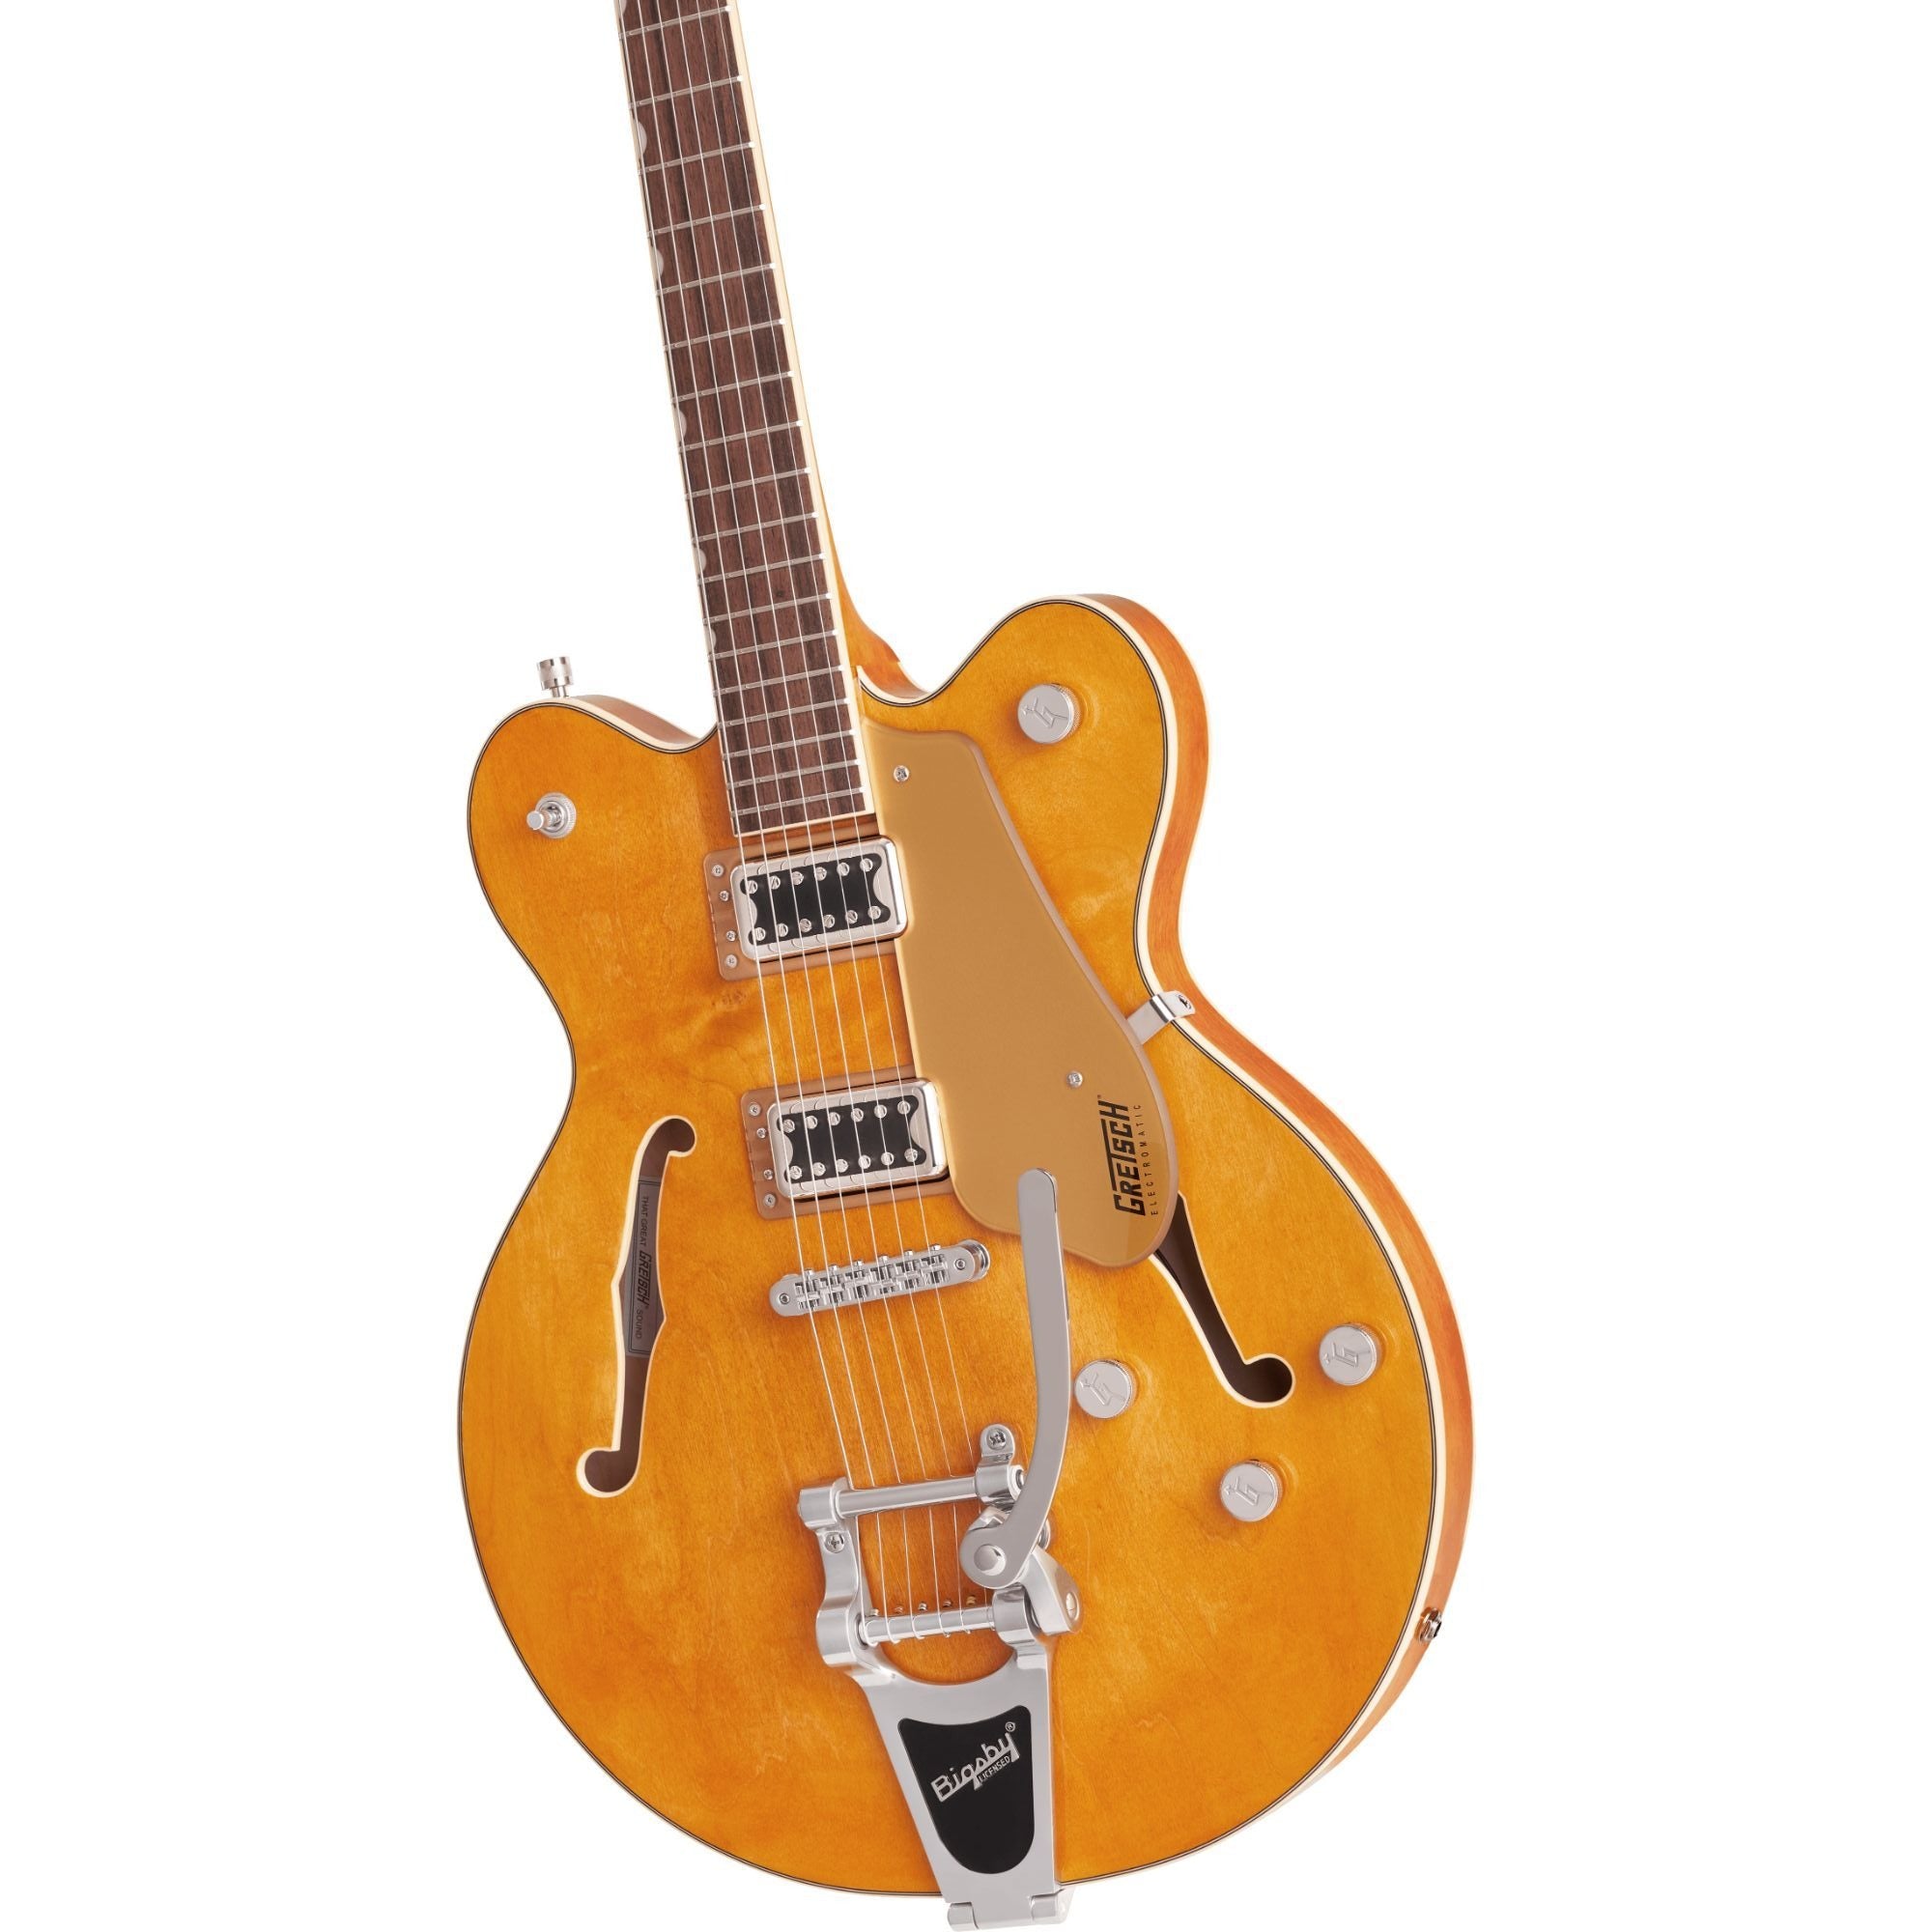 Gretsch G5622T Electromatic Center Block Double-Cut with Bigsby, Speyside